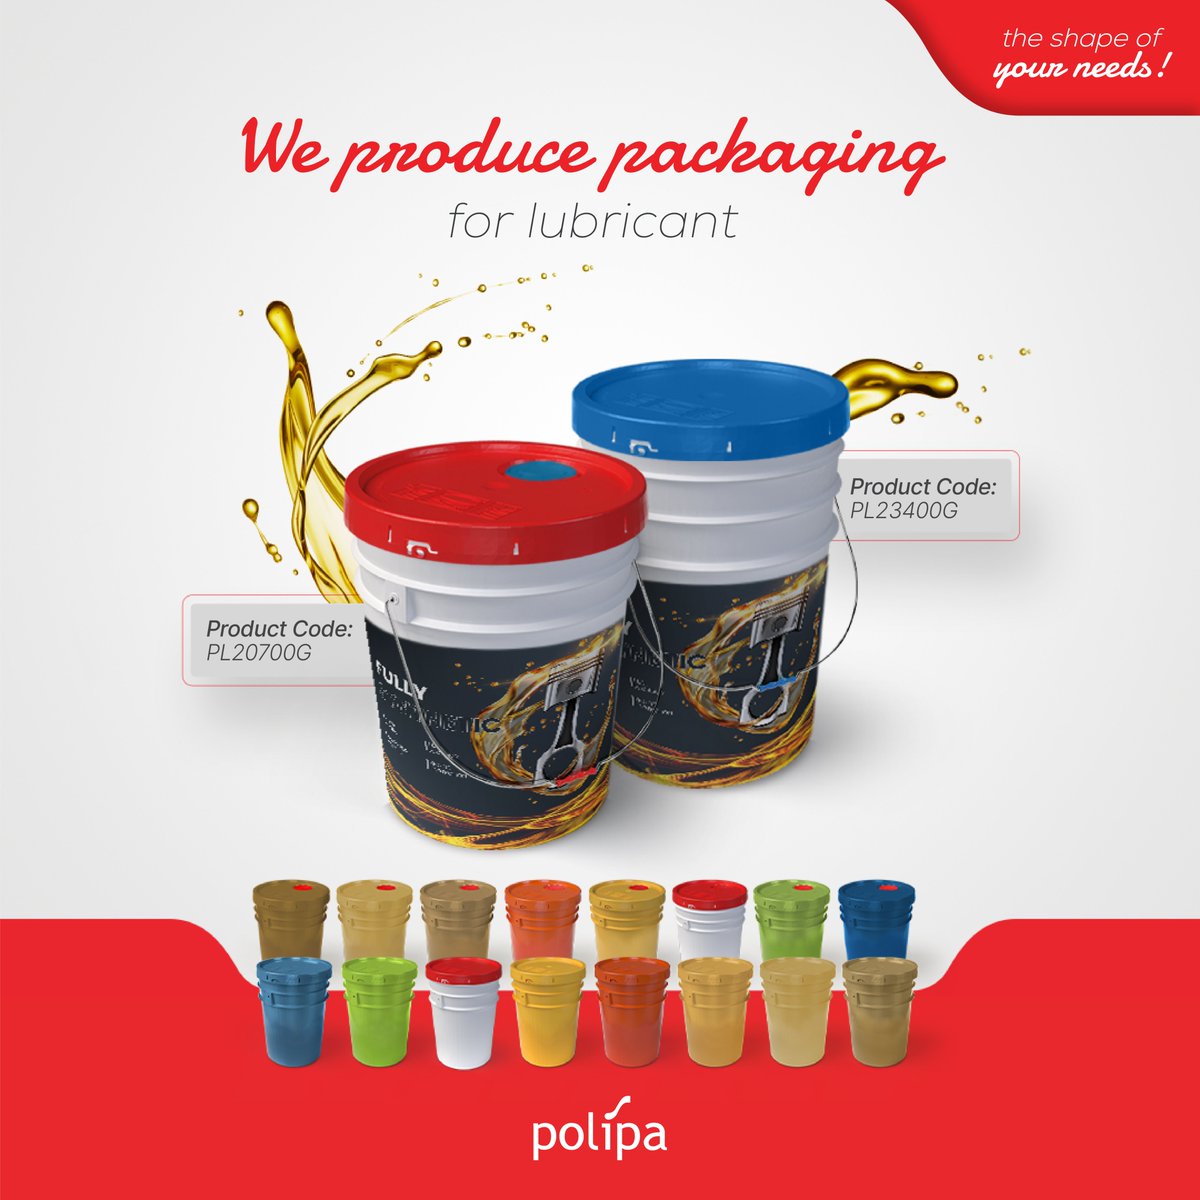 Polipa industrial pails are designed to meet your business needs and enhance your operations with their compatibility with lubricants. The custom metal handles of our products make your work more efficient and reliable.